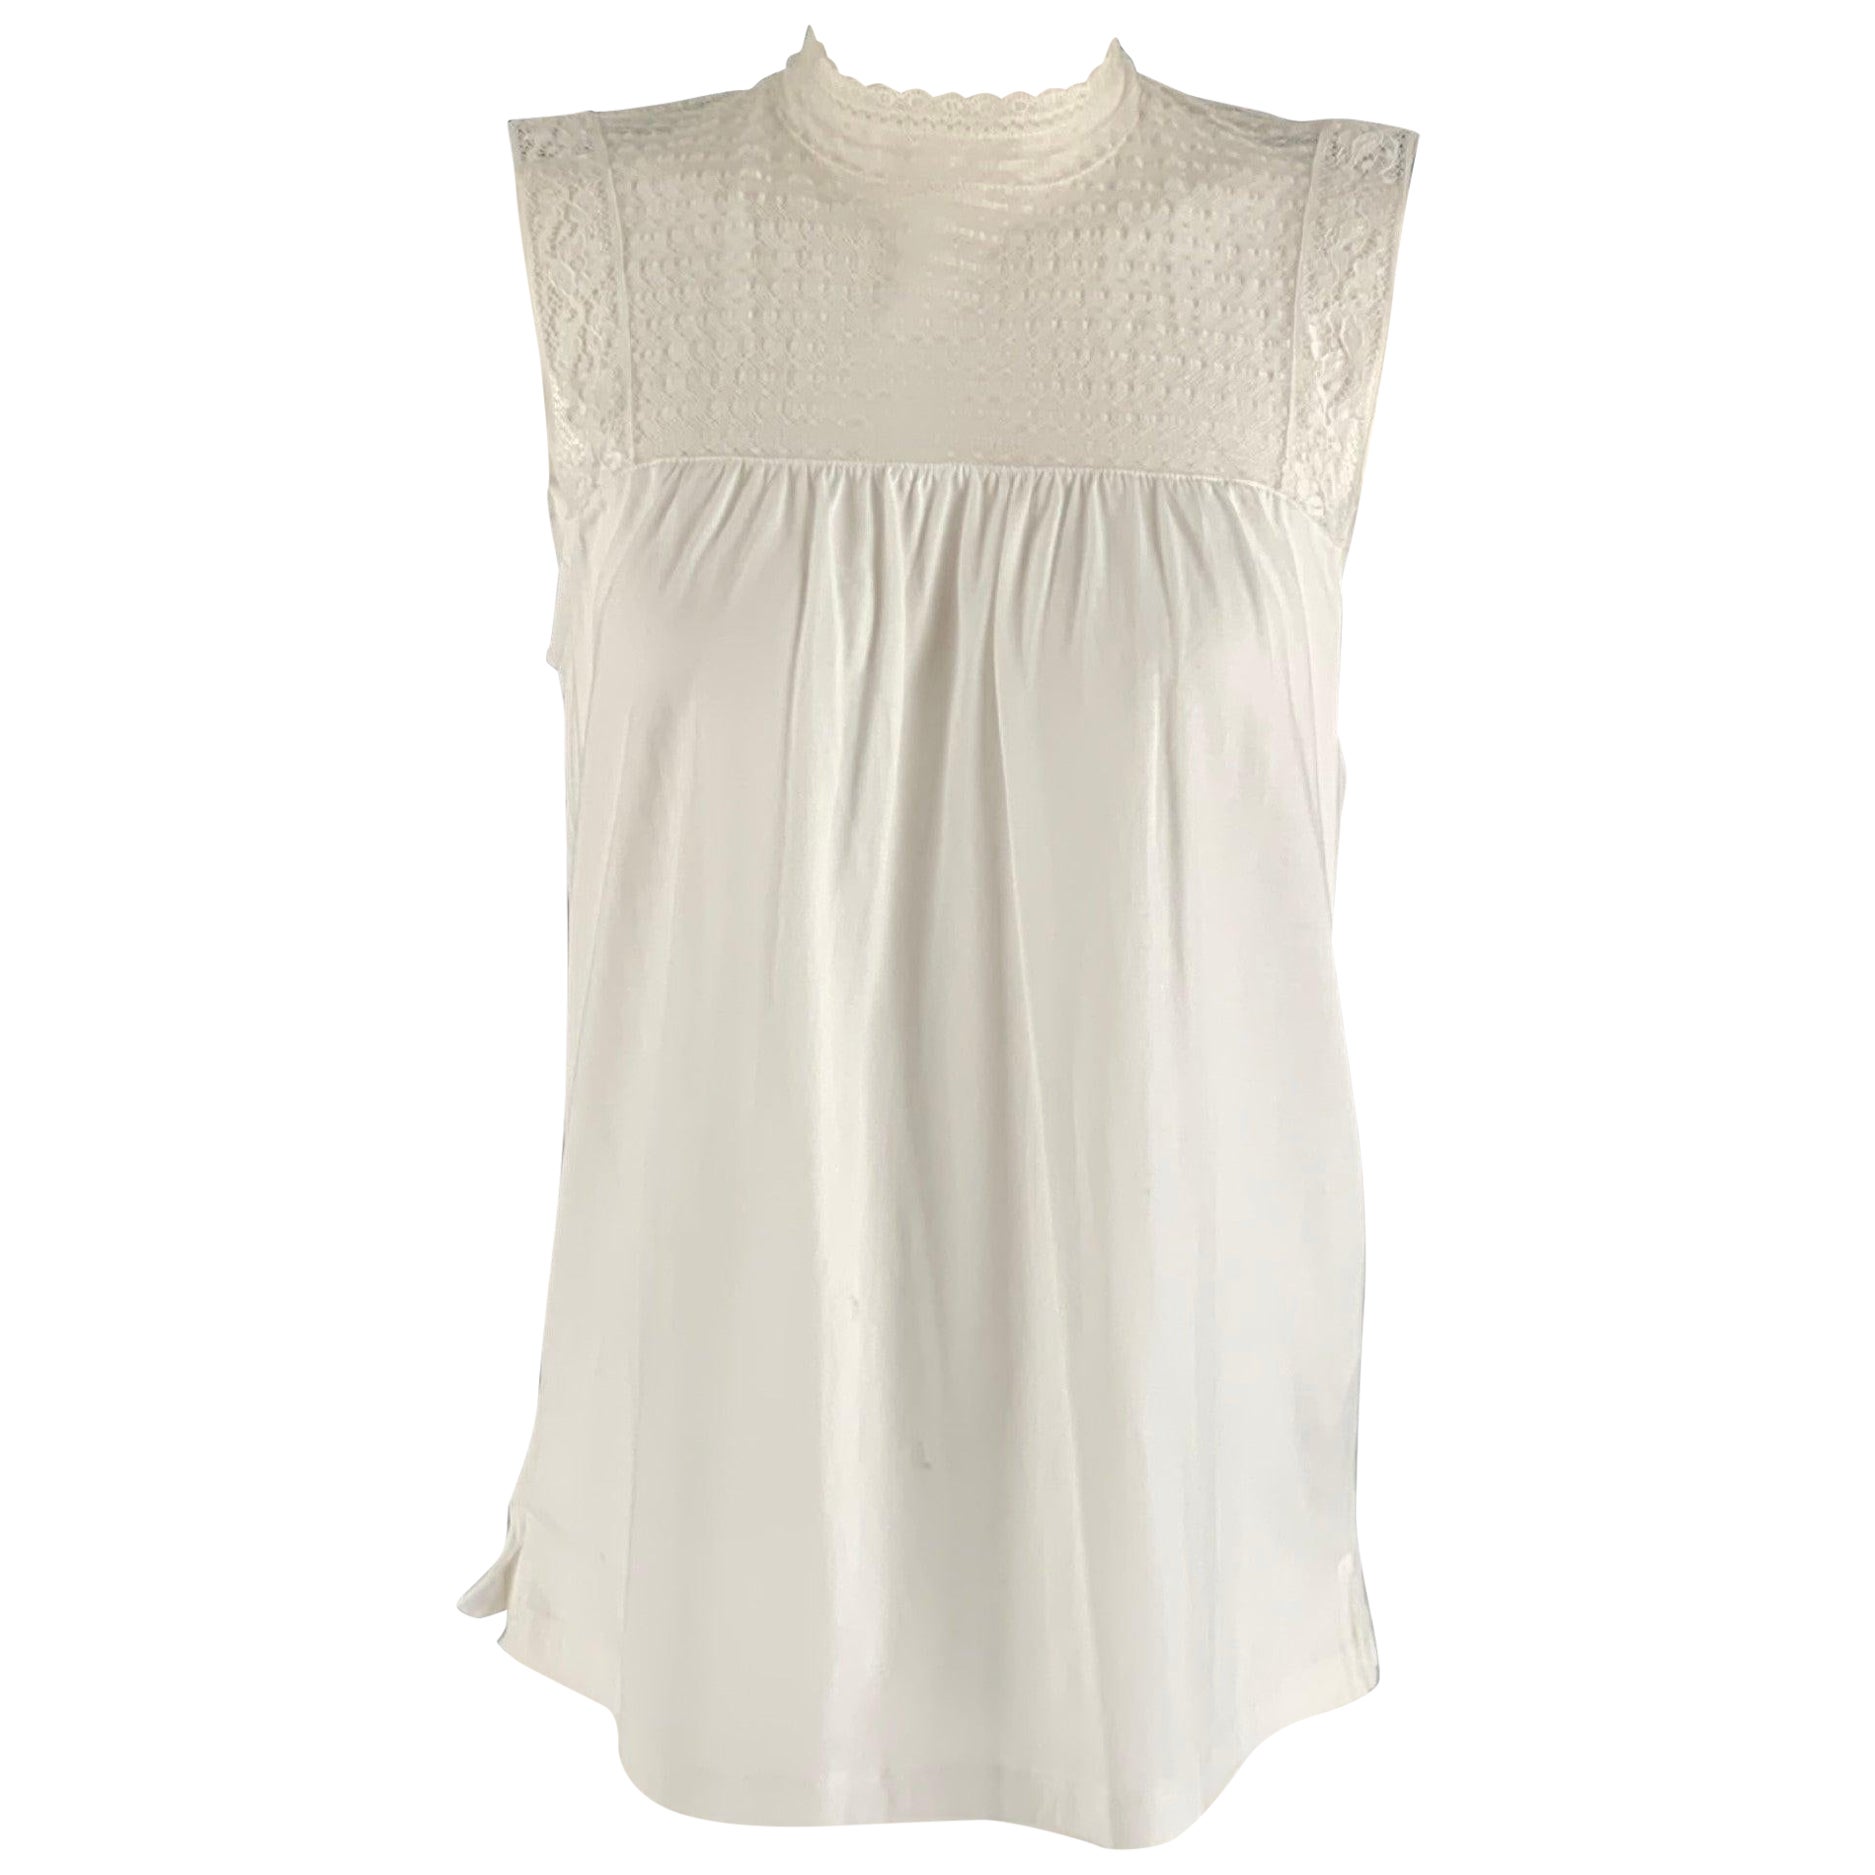 BURBERRY LONDON Size M White Cotton Sleeveless Casual Top For Sale